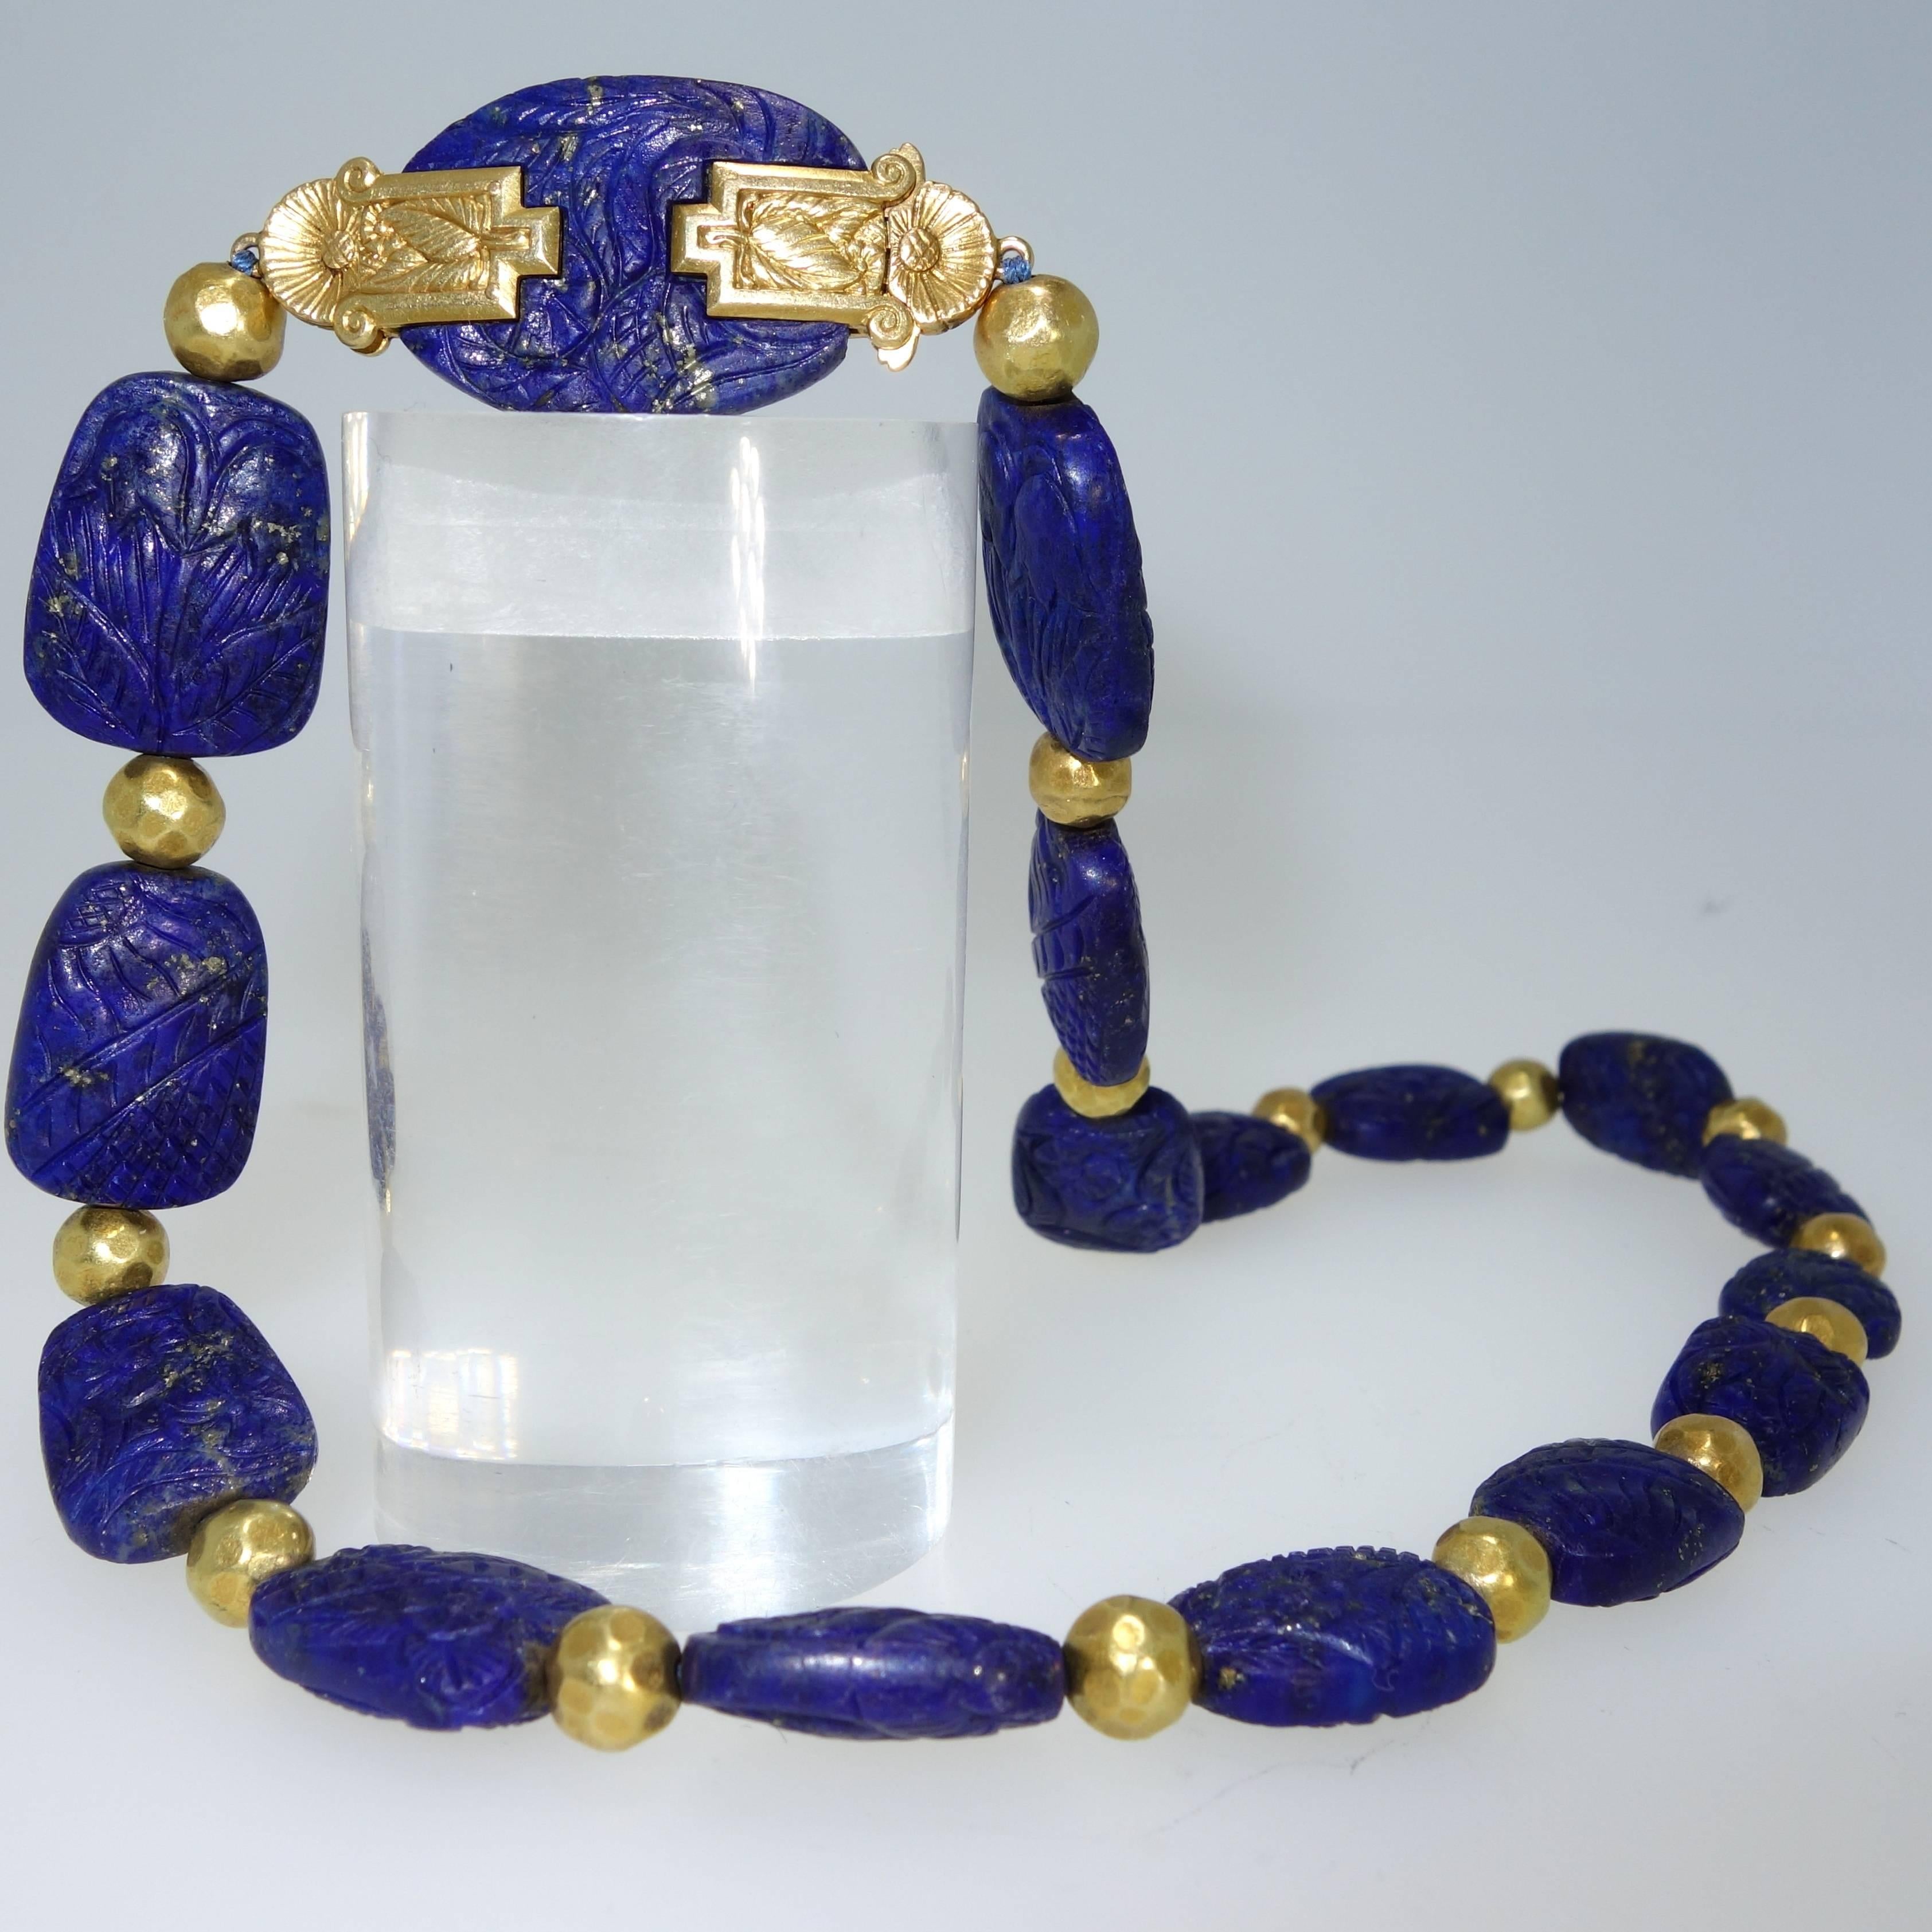 Women's 1920s French Art Deco Carved Lapis Gold Necklace